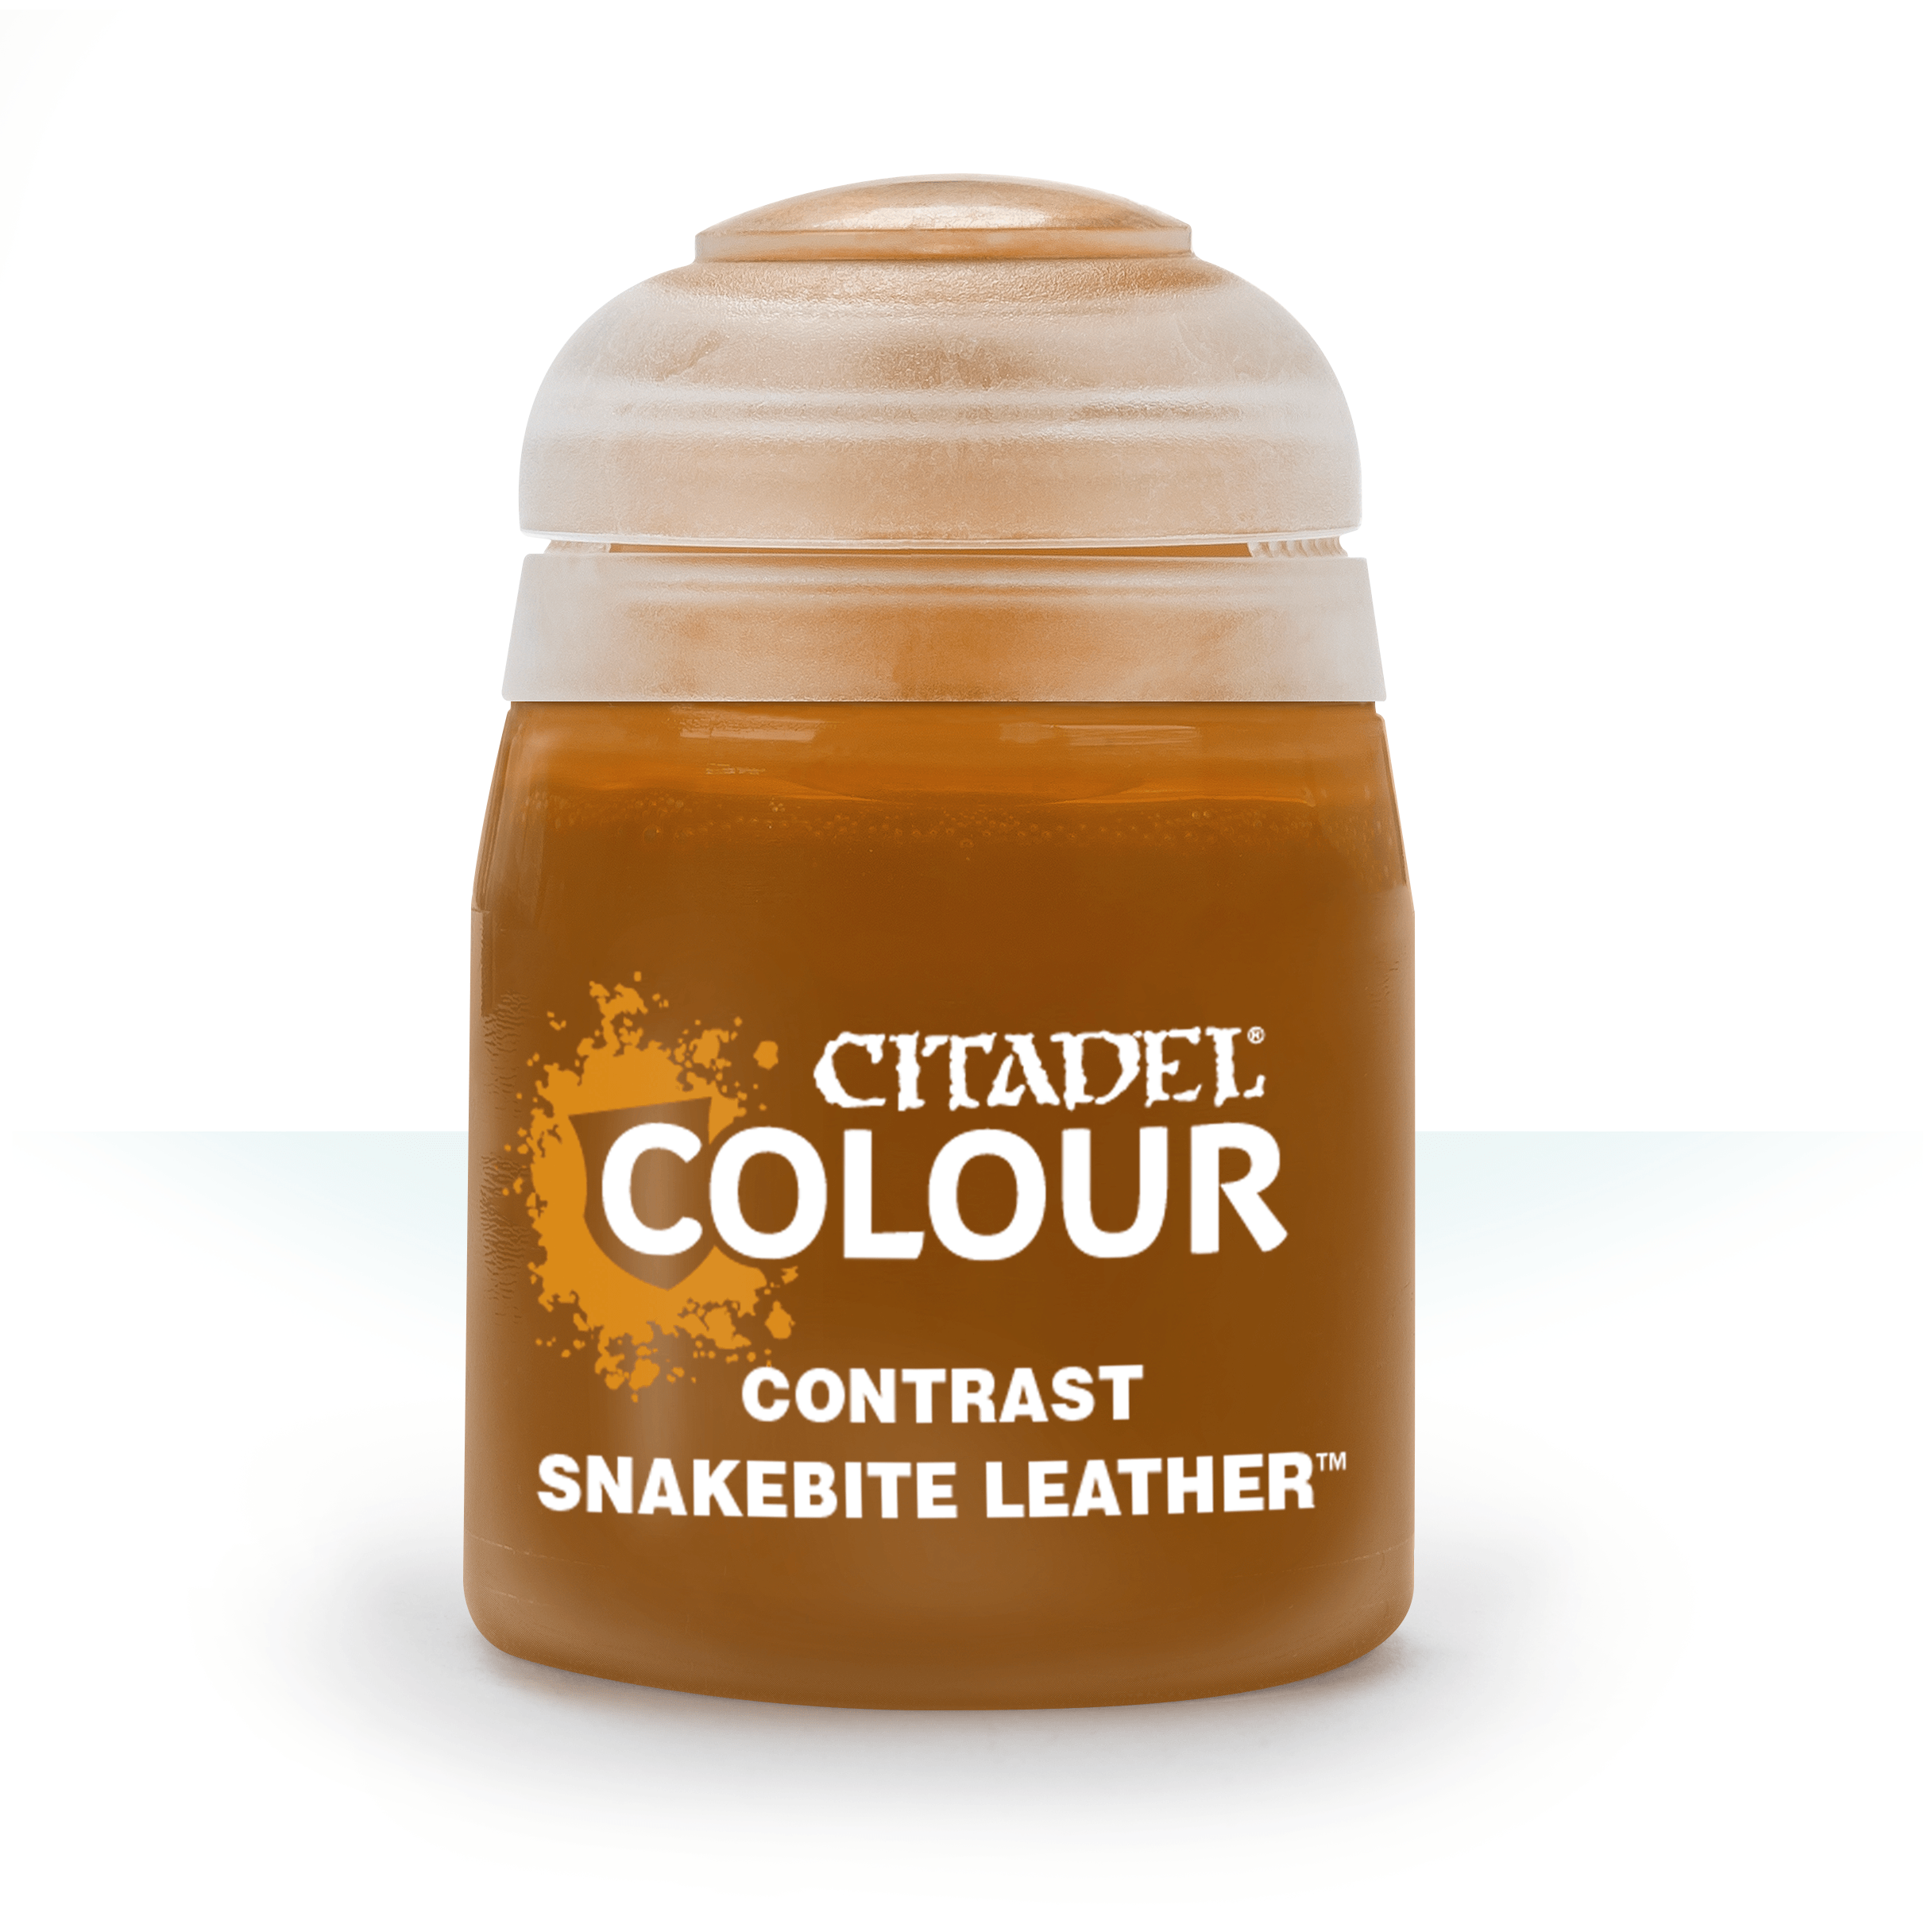 CITADEL CONTRAST SNAKEBITE LEATHER | Impulse Games and Hobbies